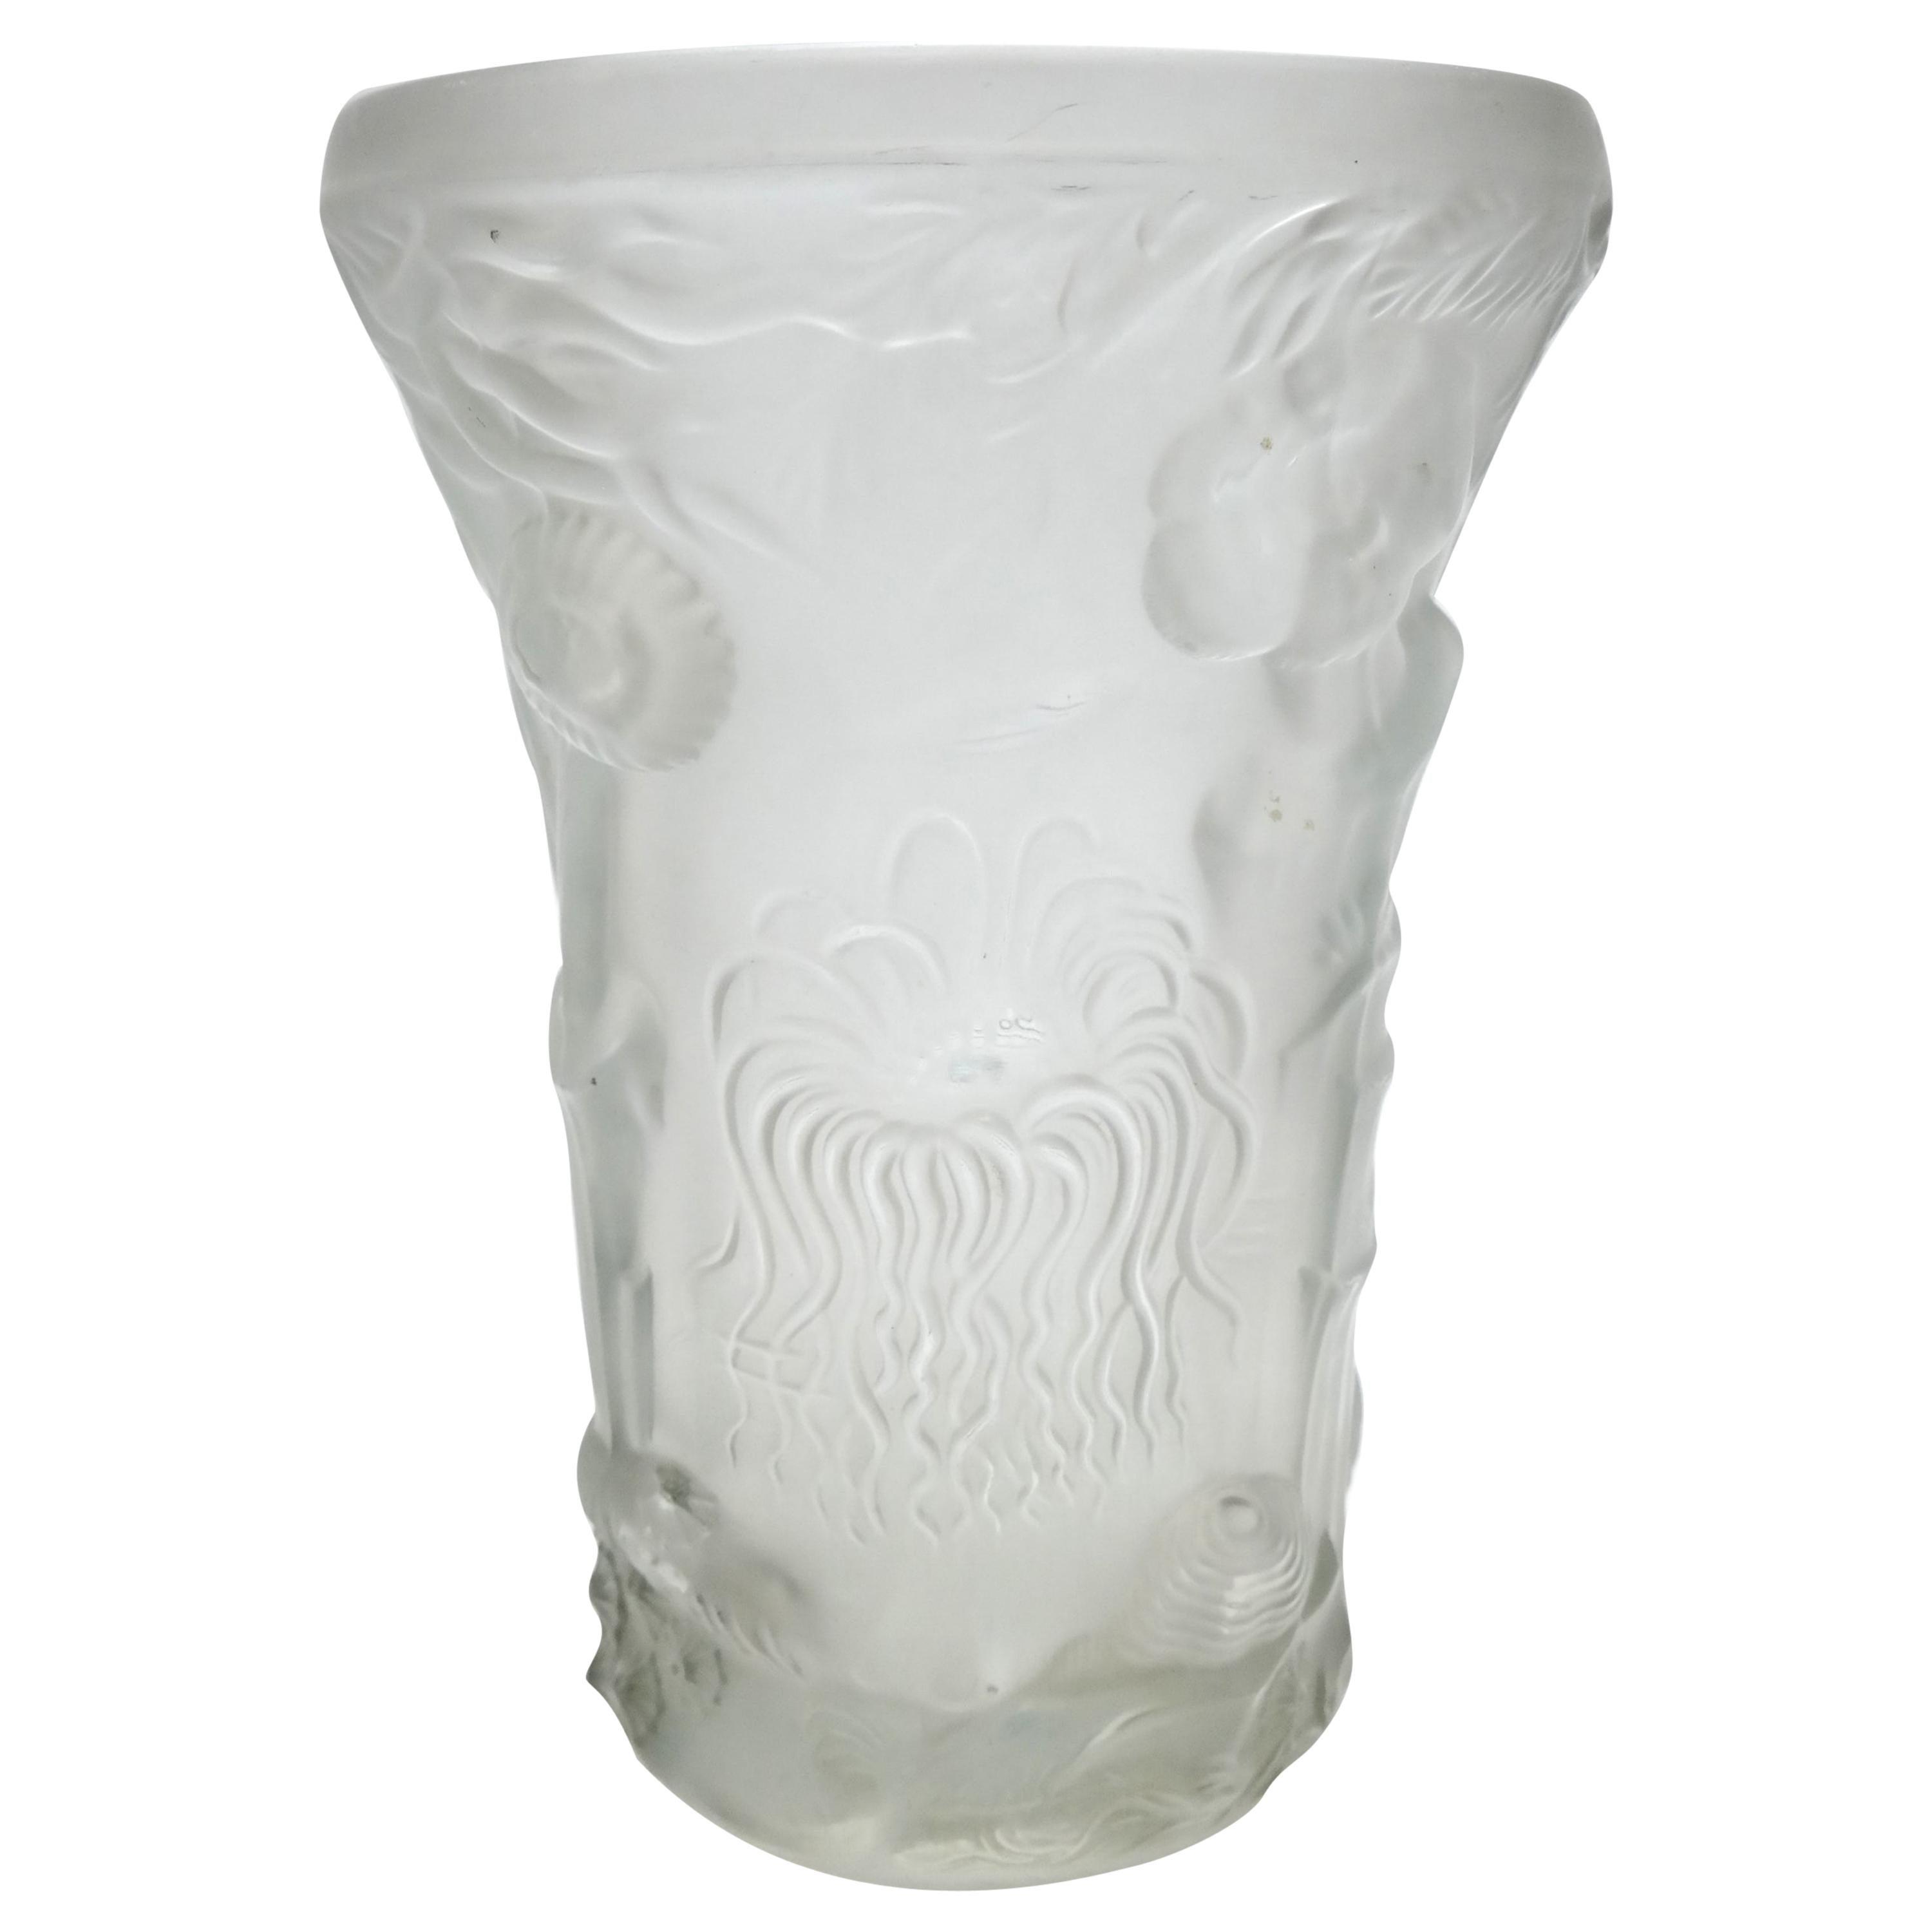 Art Deco Molded Pressed Glass Vase in Lalique Style